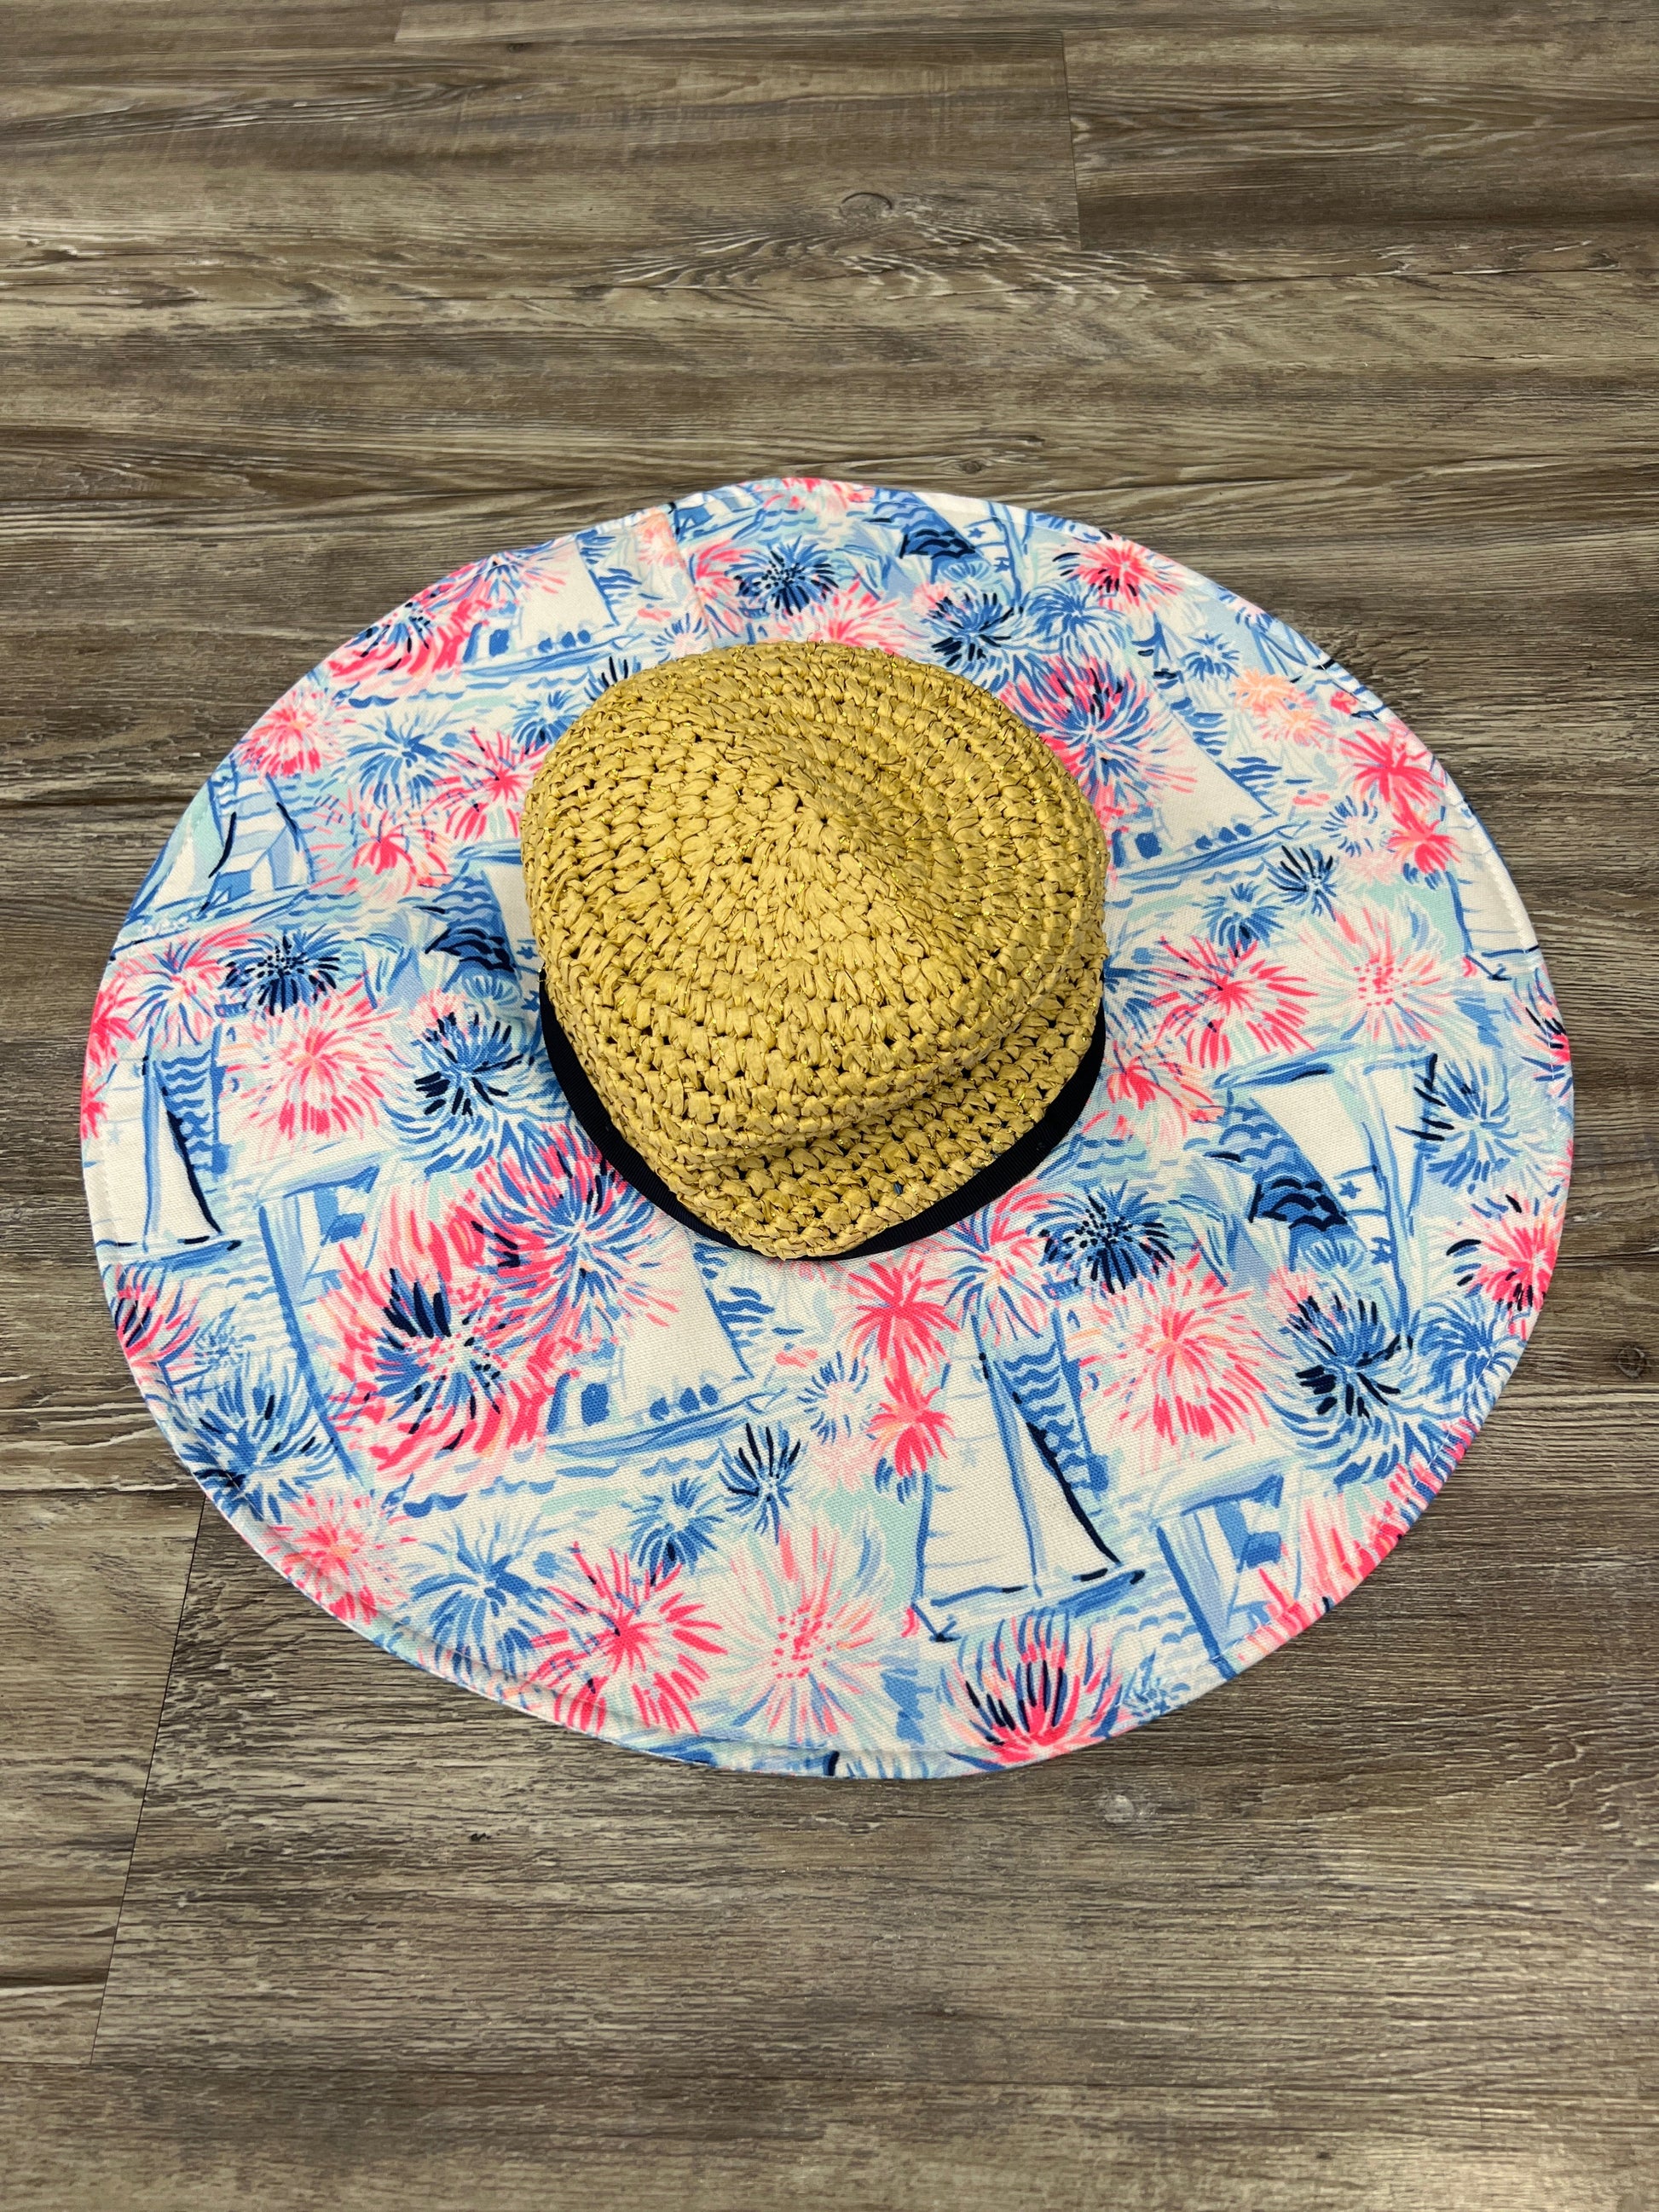 Lilly Pulitzer Floppy Hats for Women